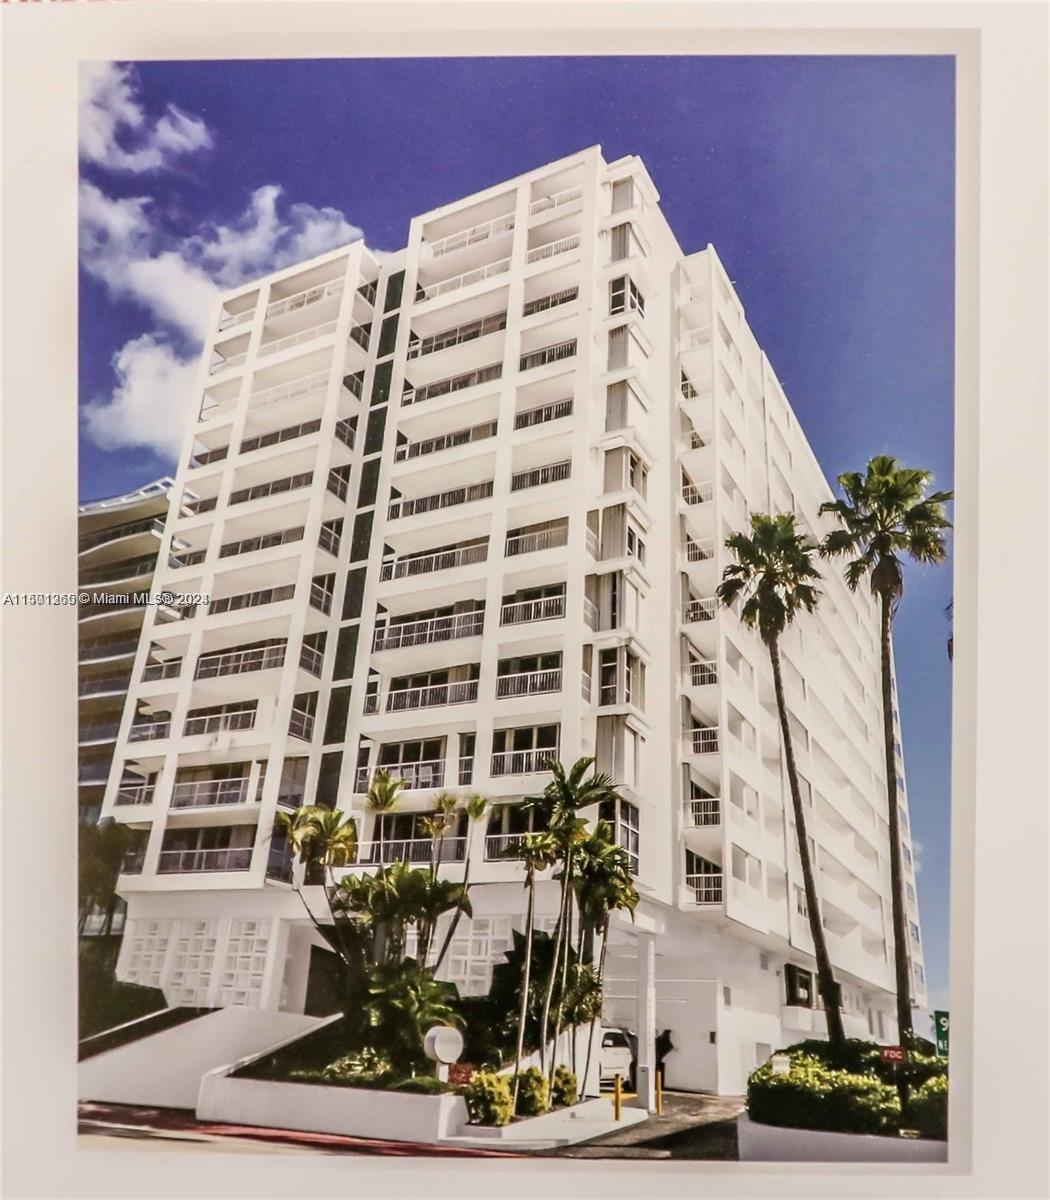 Best Deal in  on the Ocean!!!Oceanfront building in Surfside !!!Large 2 bedrooms 2 baths with 1590 sq ft, tile floors, washer and dryer inside the unit.
Only 4 per floor, building offers pool, party rooms, gym, sauna, and outside Jacuzzi.
Currently rented until September 14, 2024.